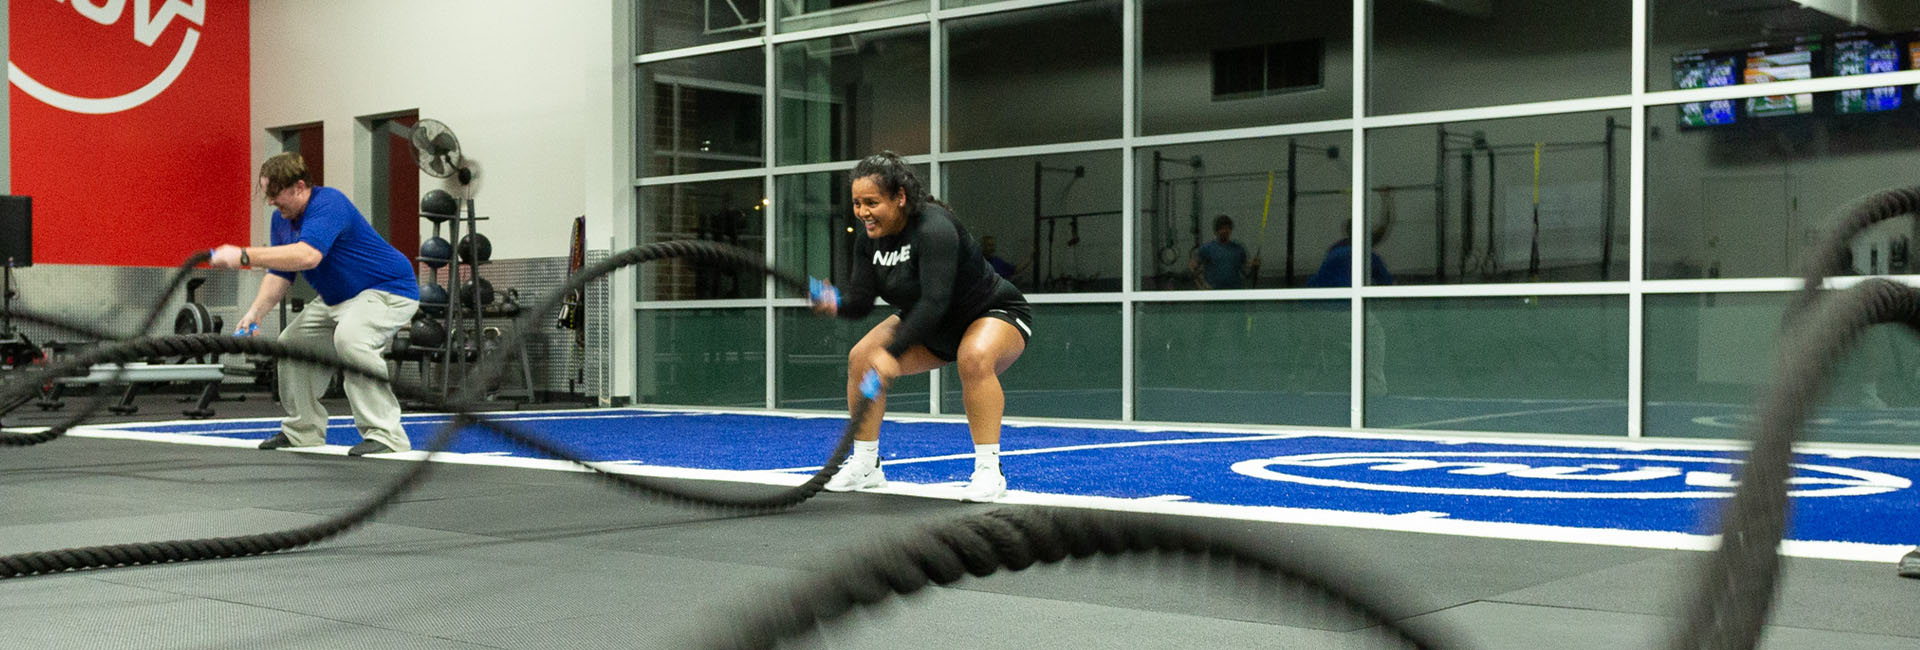 battle ropes being used by a man and woman exercising at a gym in everett